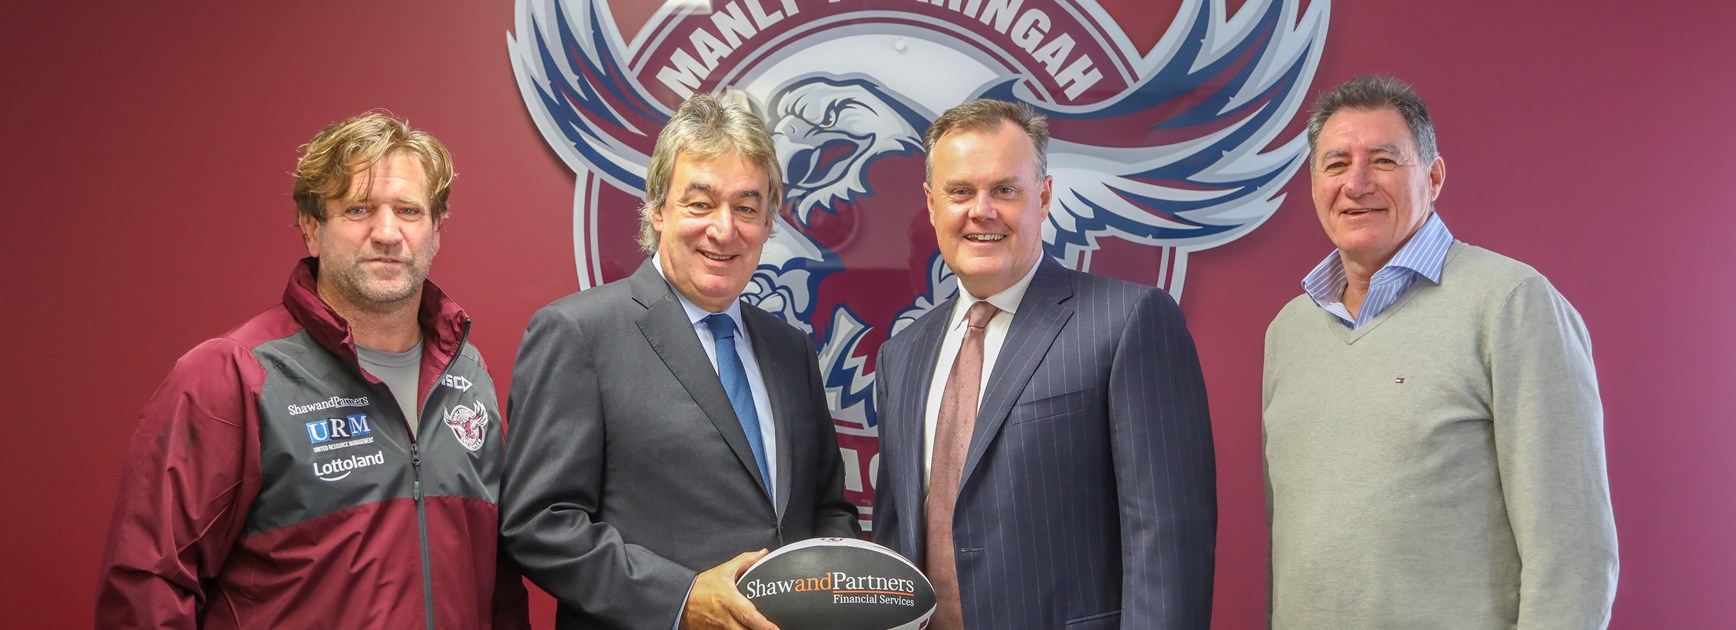 Shaw and Partners Co-CEOs, Allan Zion (middle left) and Earl Evans (middle right) with Sea Eagles Head Coach, Des Hasler, and Director, Gary Wolman (far right). Photo: Manly Media 
 
